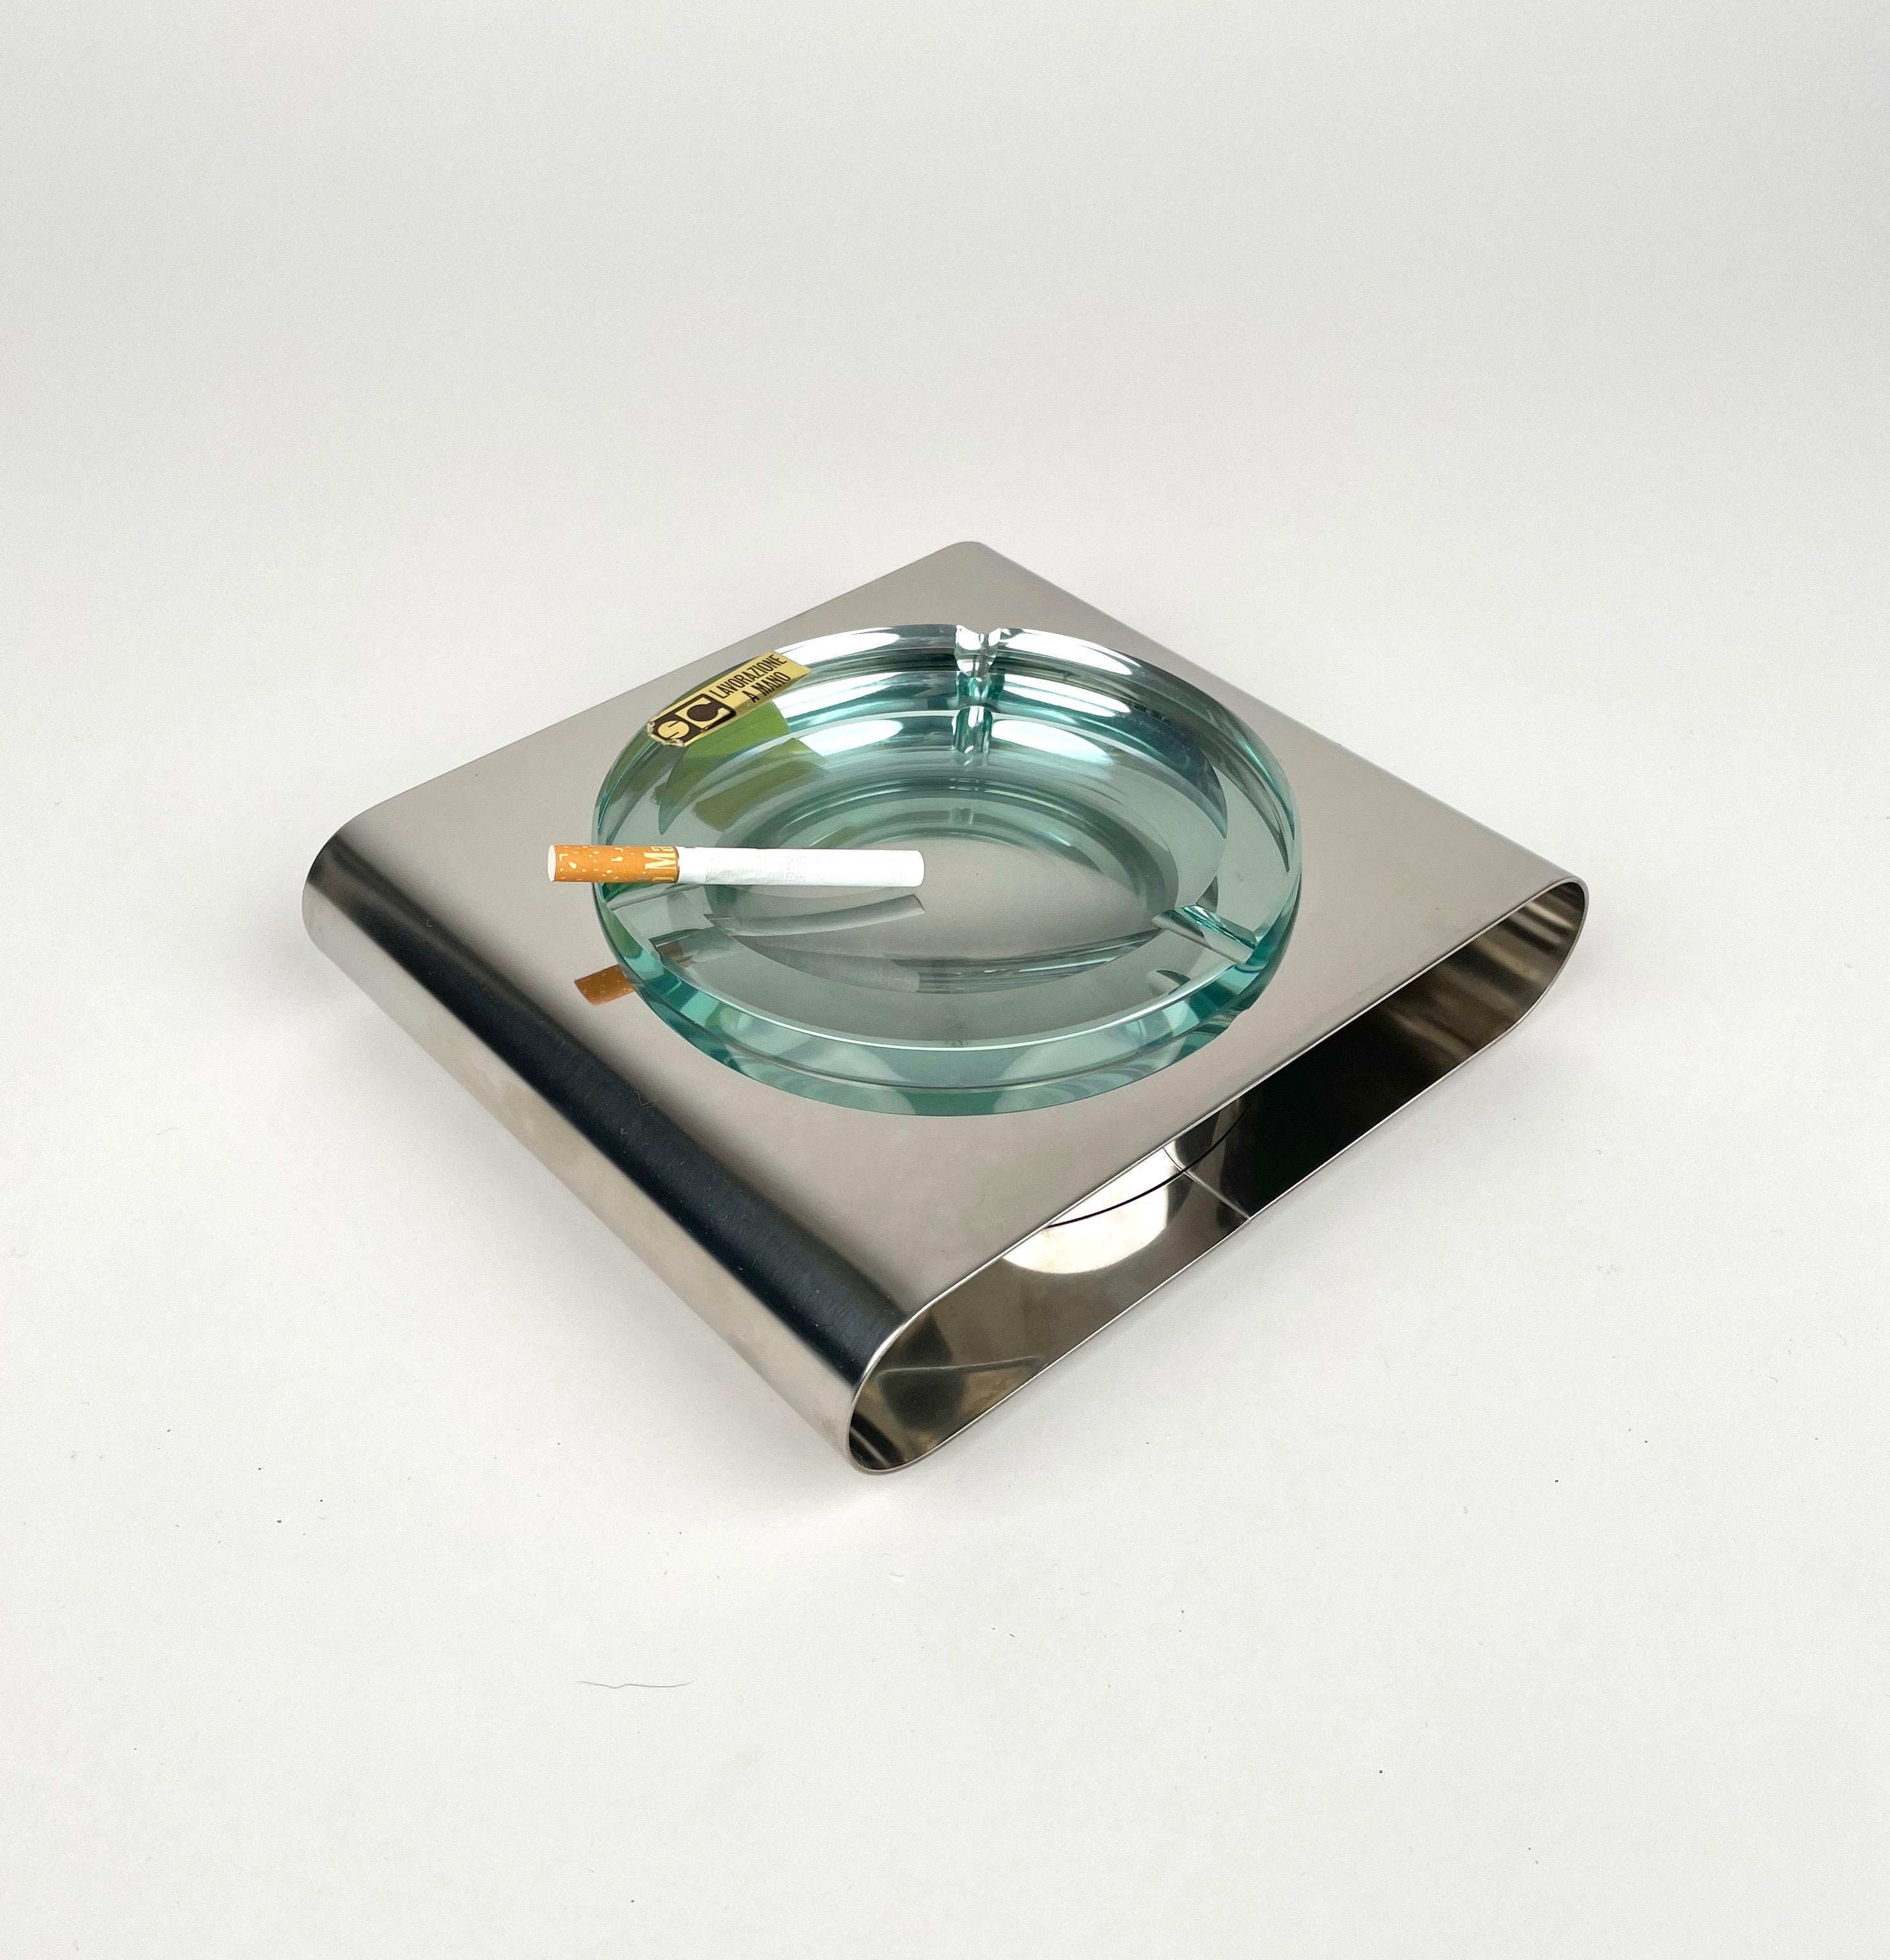 Ashtray Sena Cristal Steel and Green Glass, Italy, 1970s For Sale 6